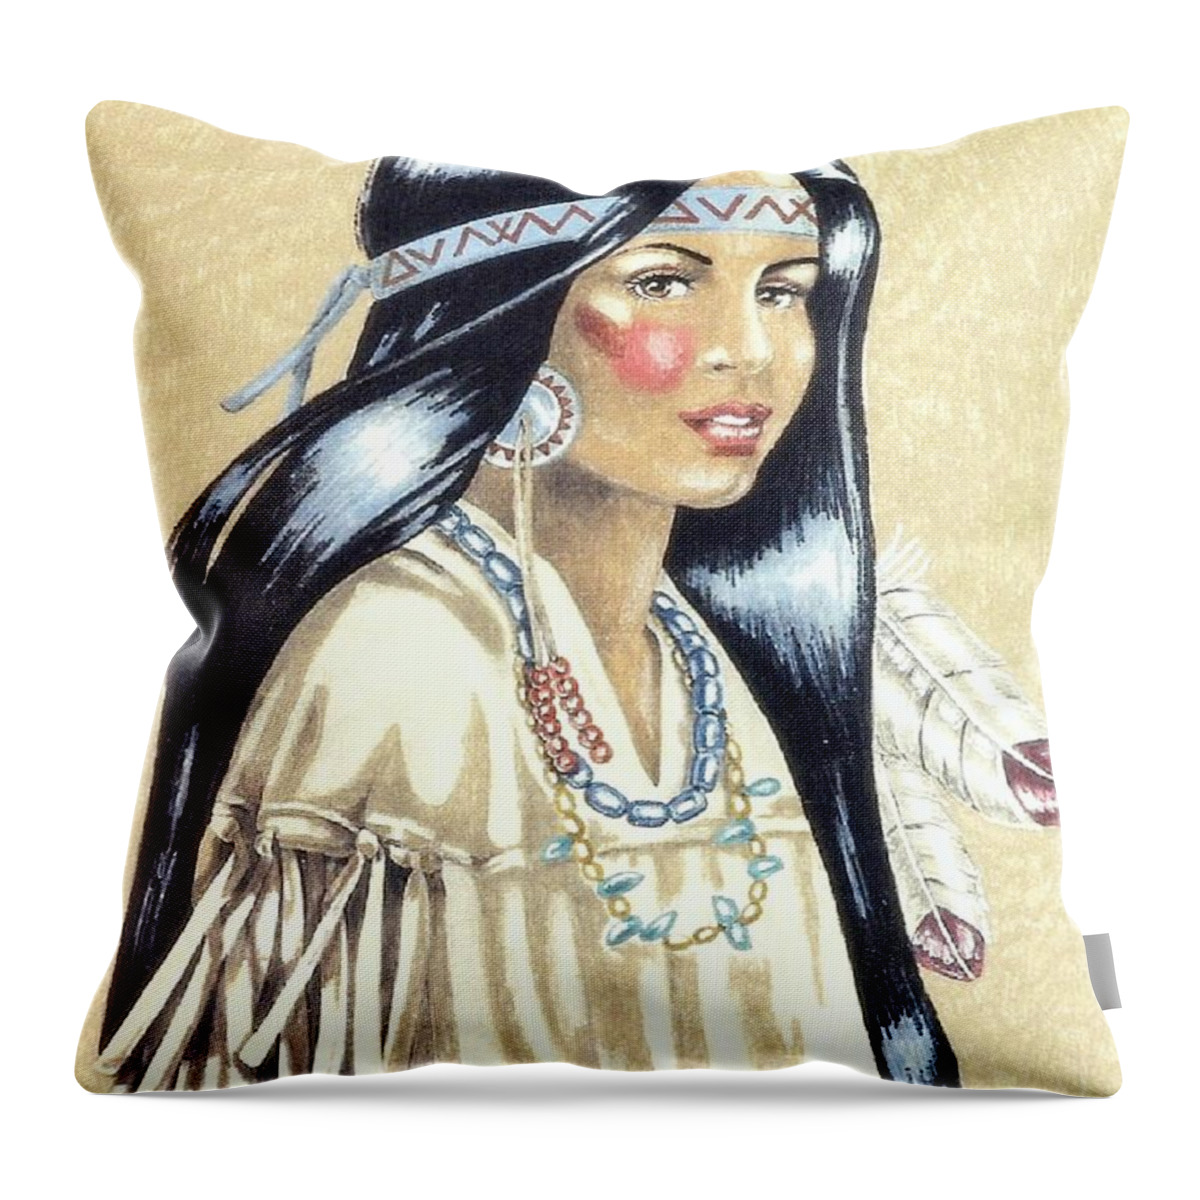 American Indians Throw Pillow featuring the painting Indian Girl by George I Perez